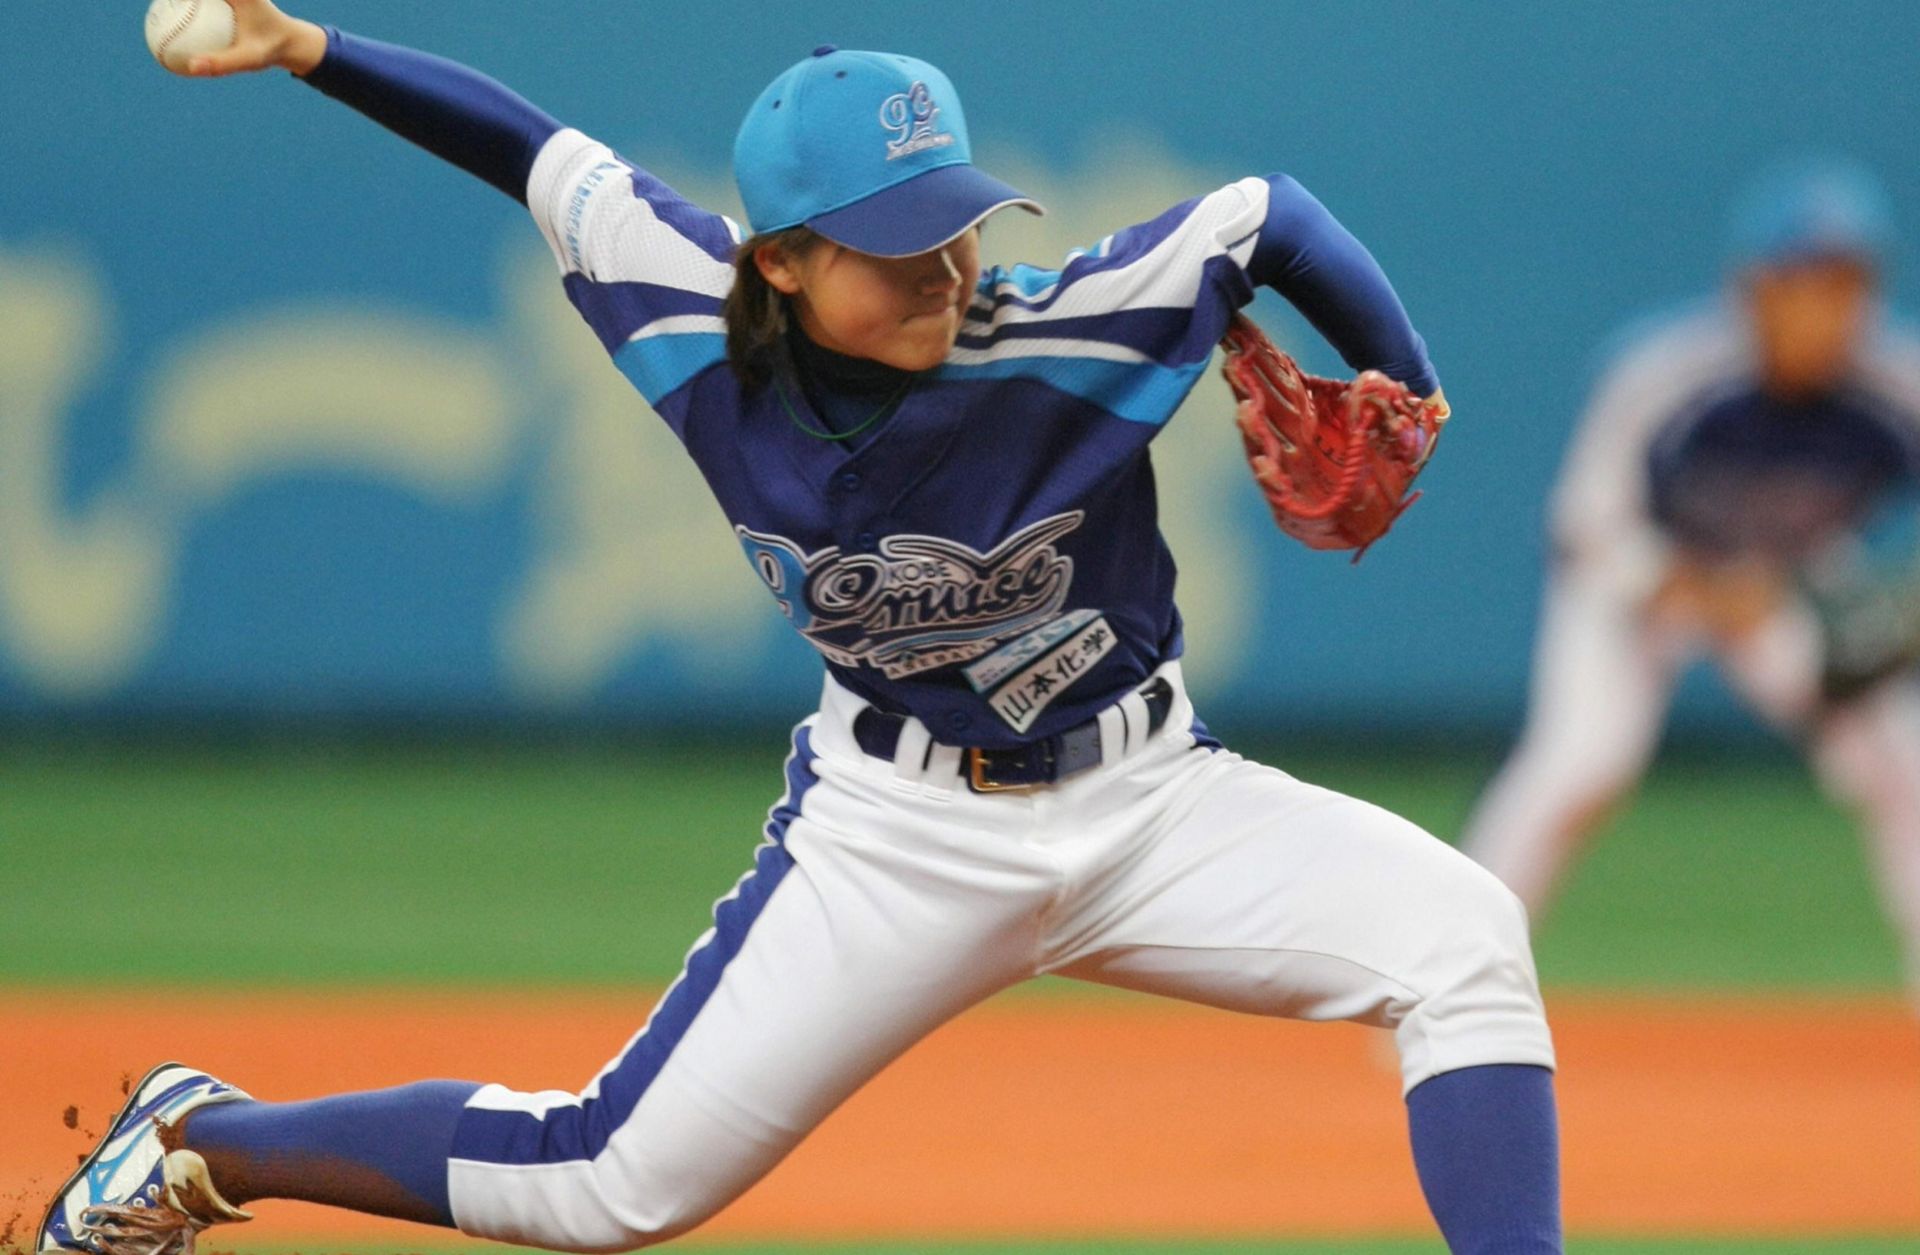 Seventeen-year-old schoolgirl Eri Yoshida became the first woman to play professional baseball with men in Japan when she took the mound at the weekend in a new independent league. 